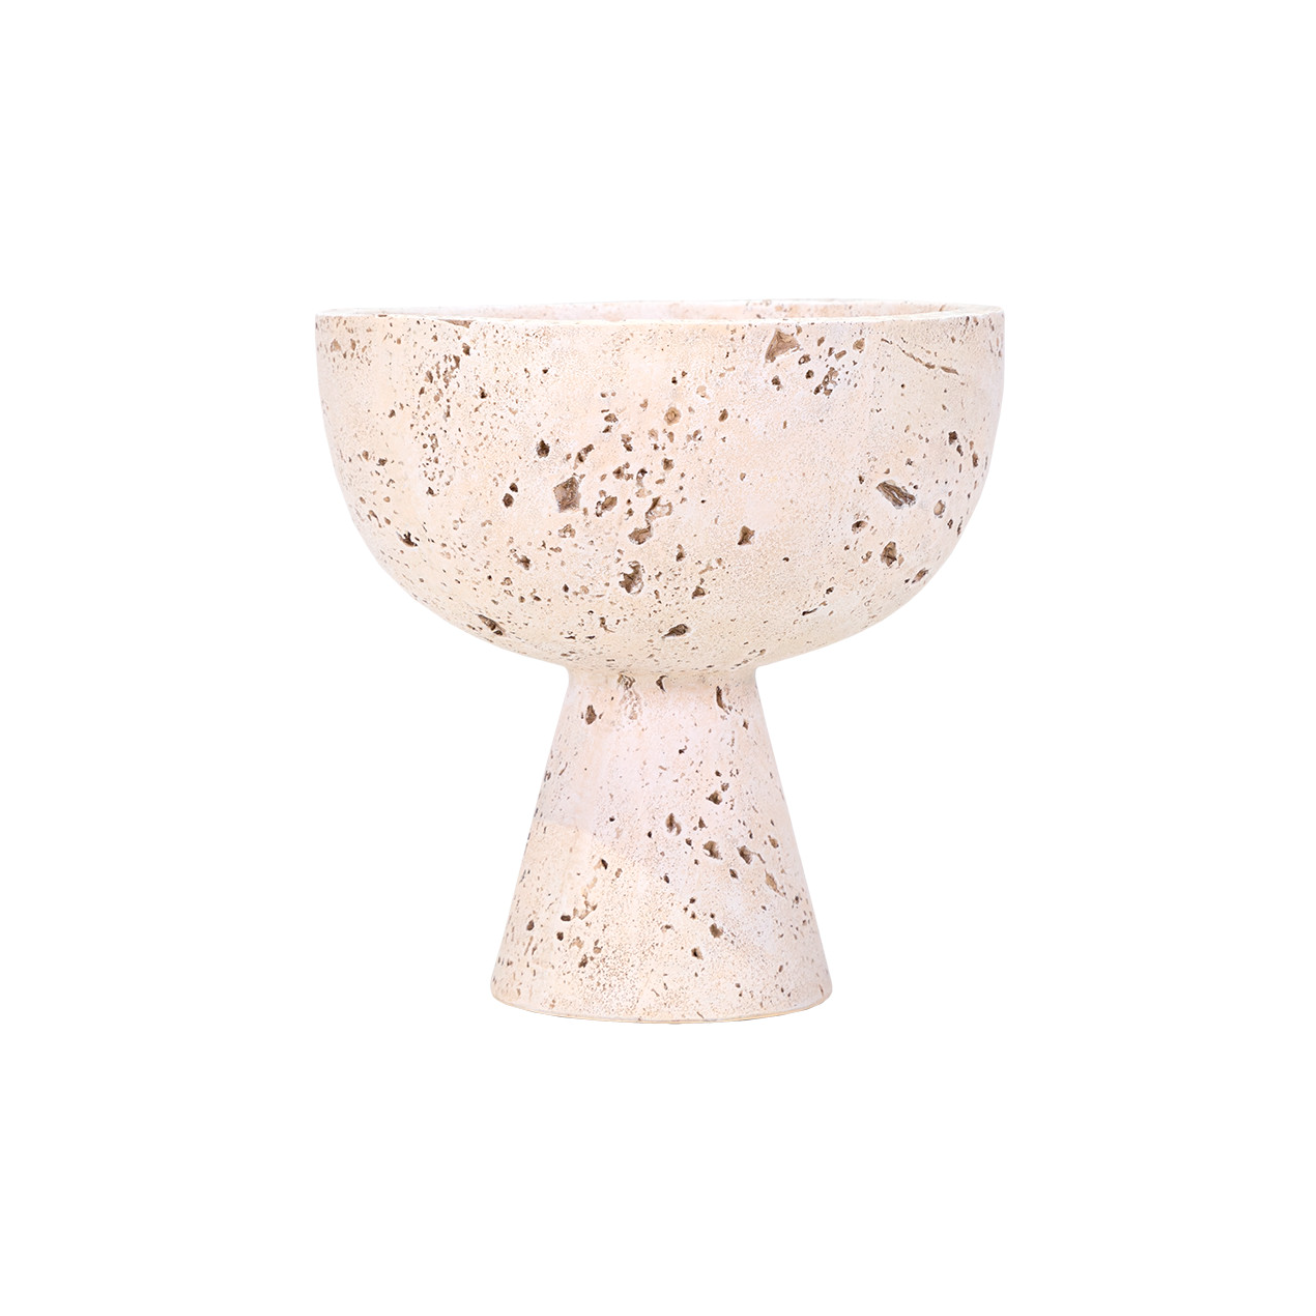 A Navona Pedestal Bowl from The Import Collection, a bungalow-style ceramic vessel with a rustic, speckled finish, isolated on a white background.